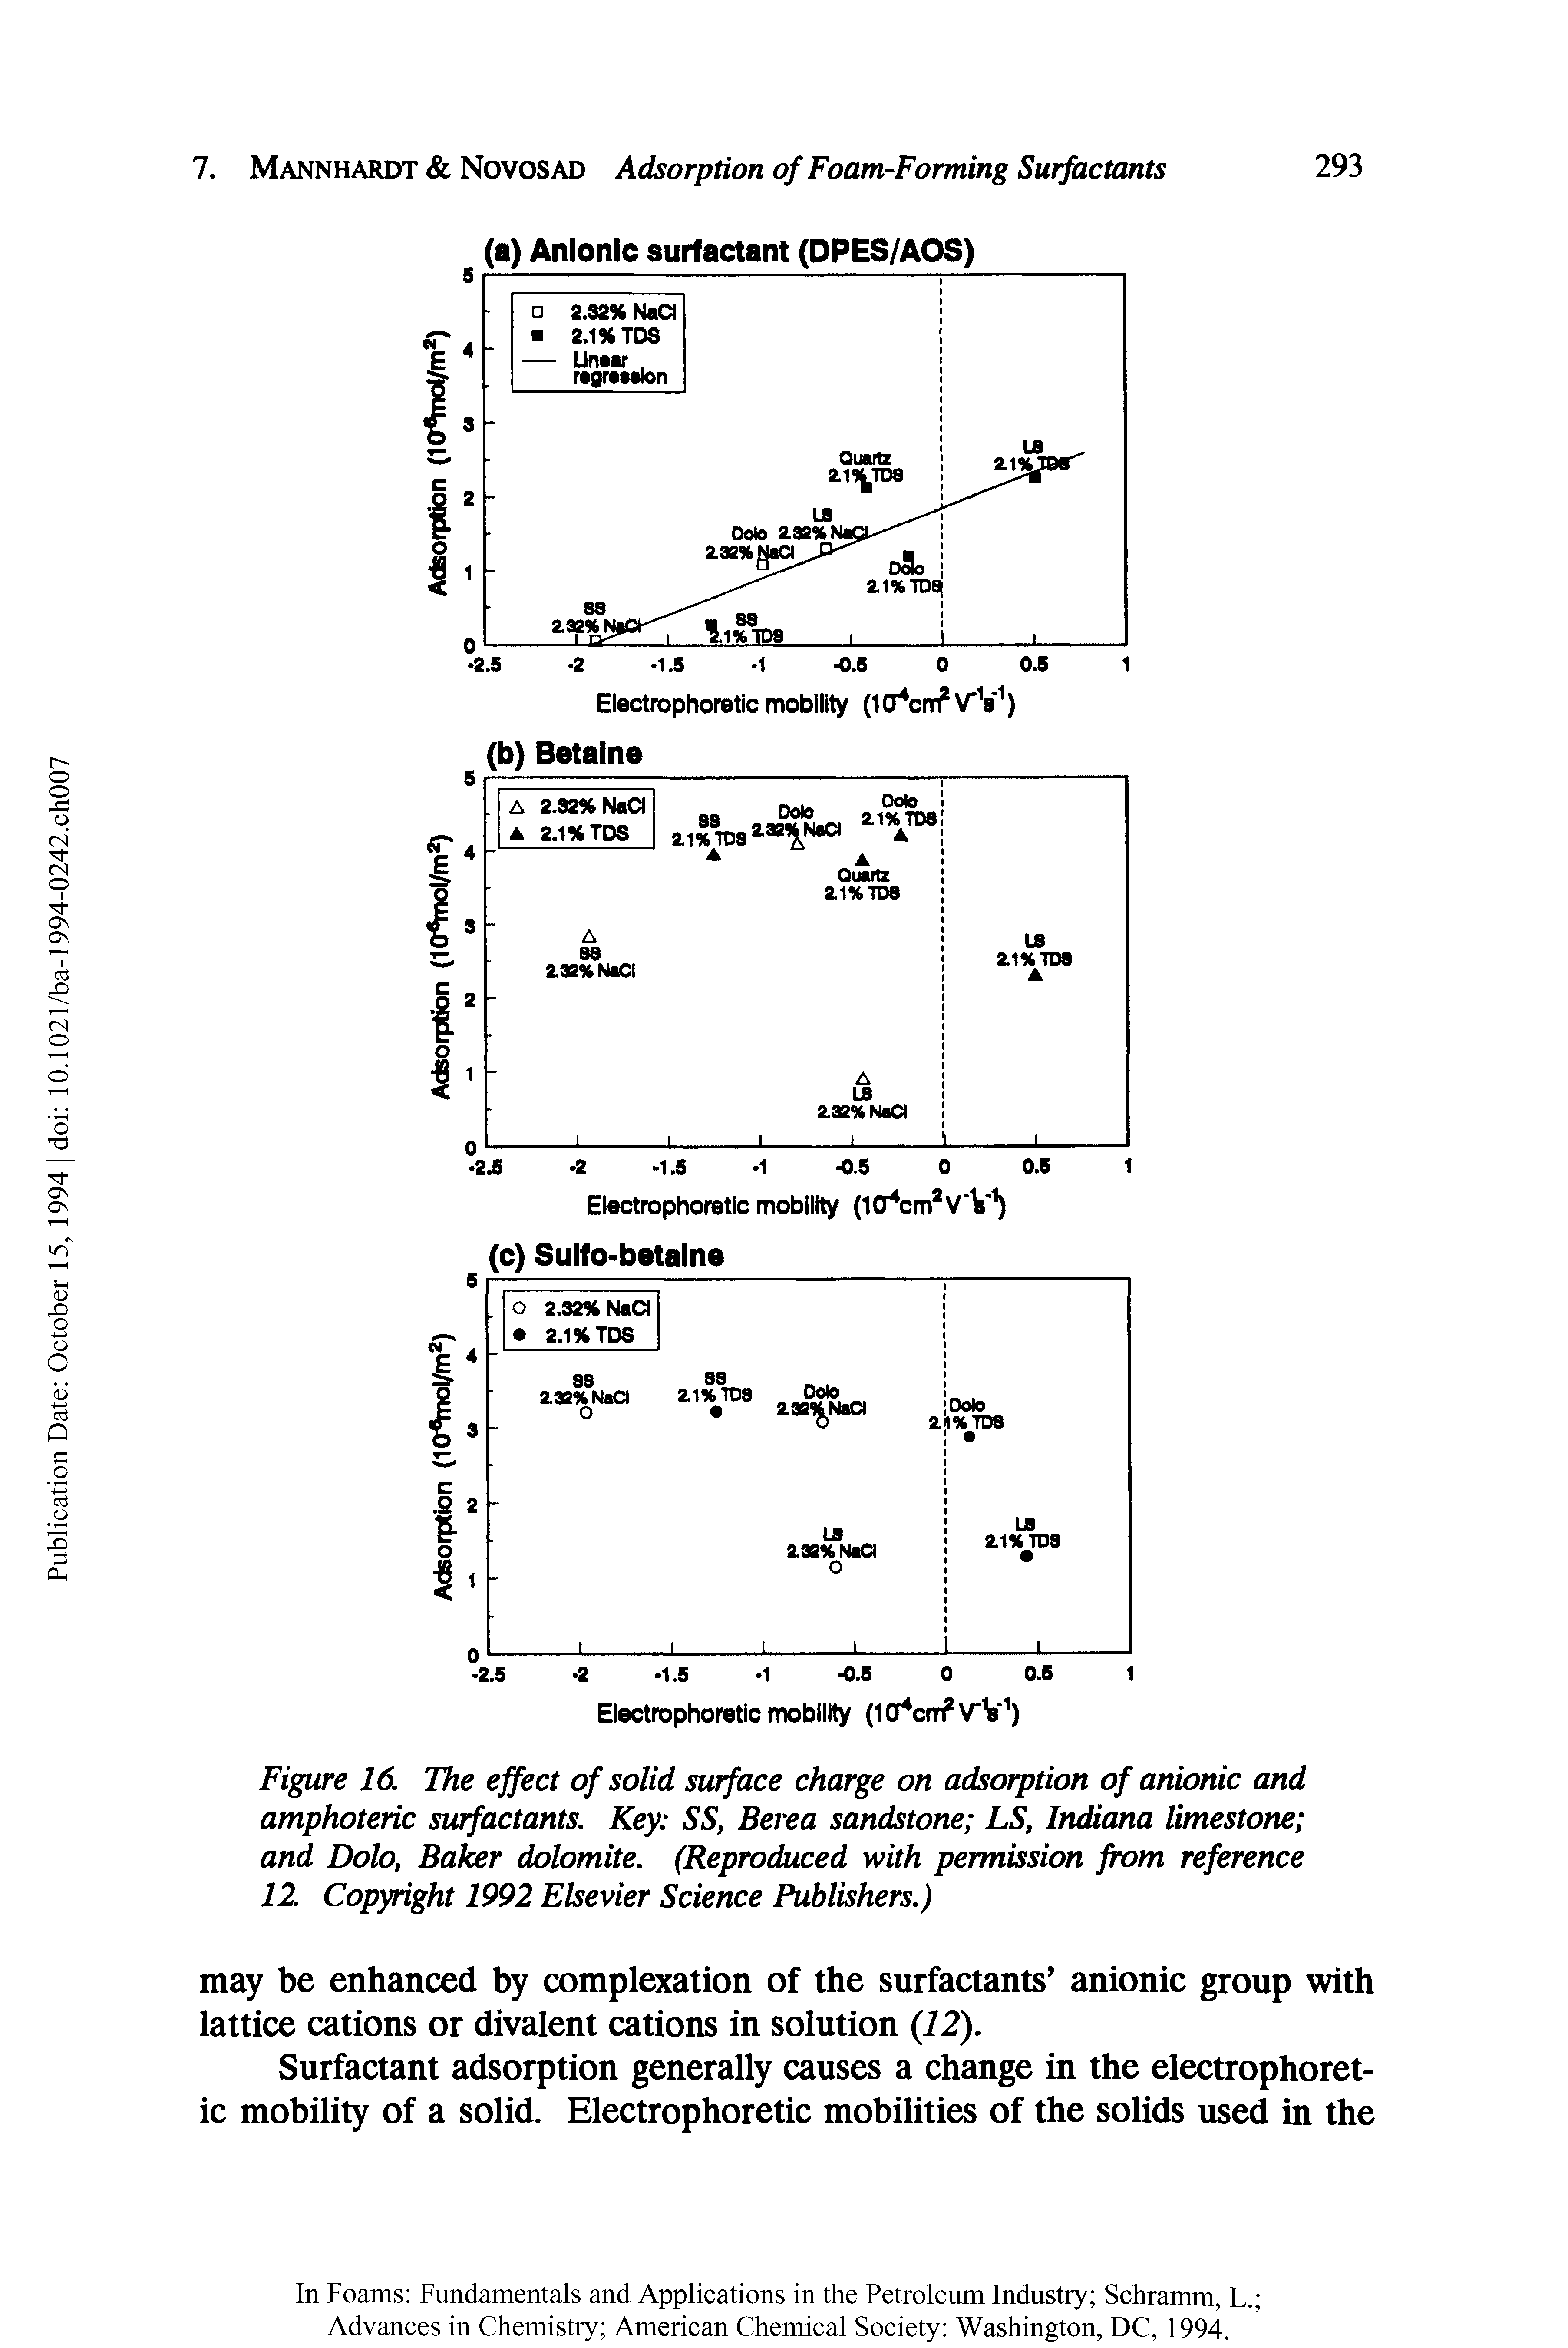 Figure 16. The effect of solid surface charge on adsorption of anionic and amphoteric surfactants. Key SS, Berea sandstone LS, Indiana limestone and Dolo, Baker dolomite. (Reproduced with permission from reference 12. Copyright 1992 Elsevier Science Publishers.)...